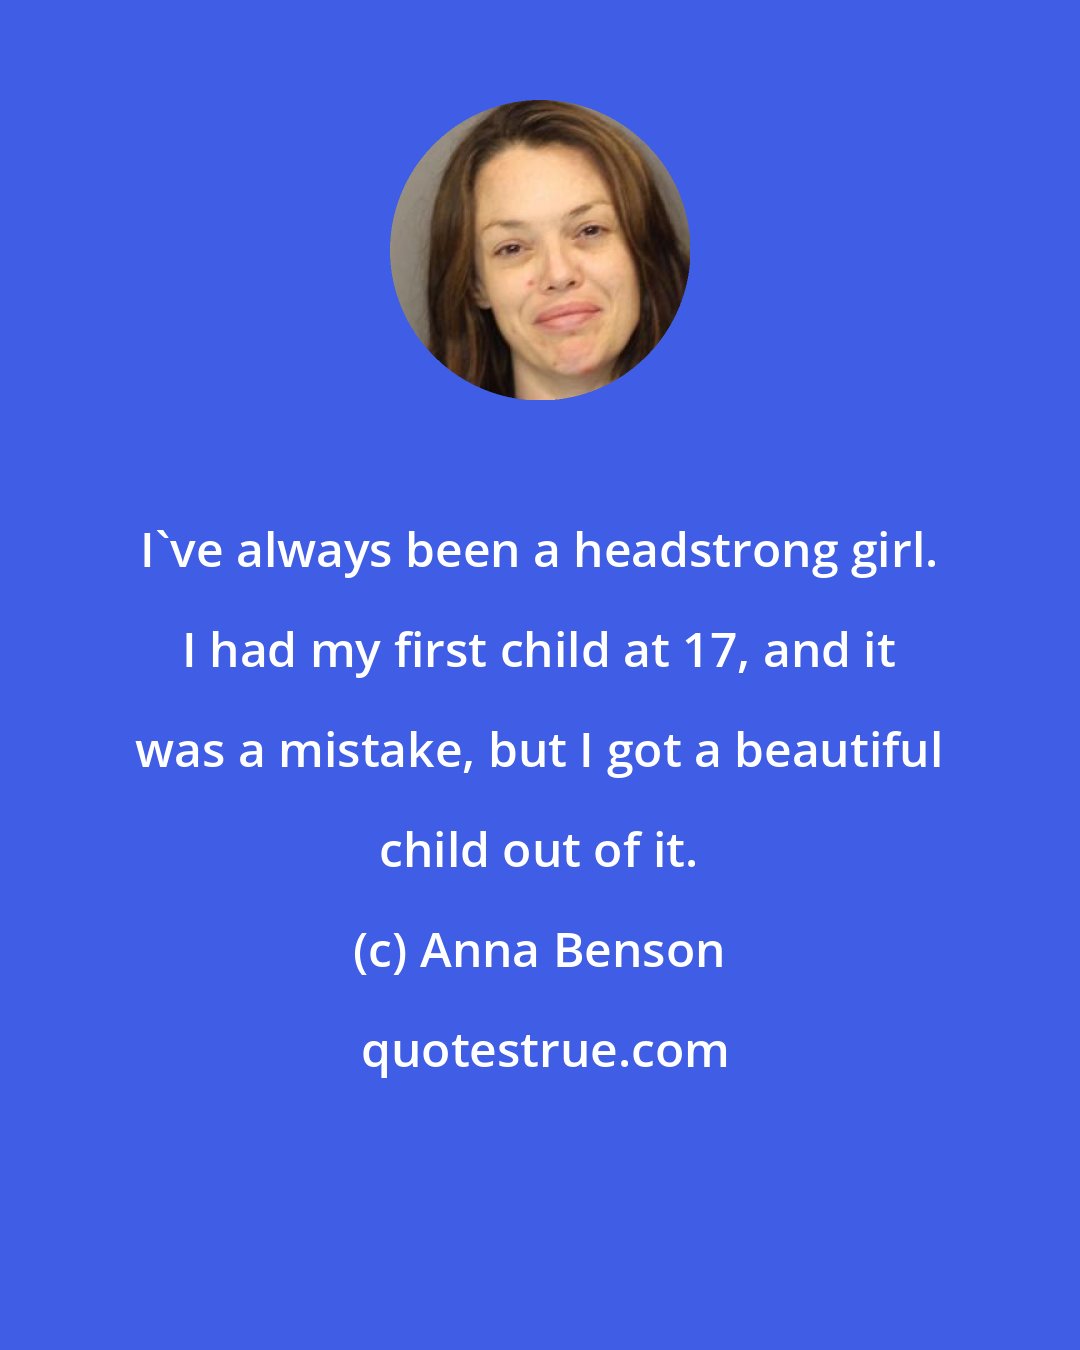 Anna Benson: I've always been a headstrong girl. I had my first child at 17, and it was a mistake, but I got a beautiful child out of it.